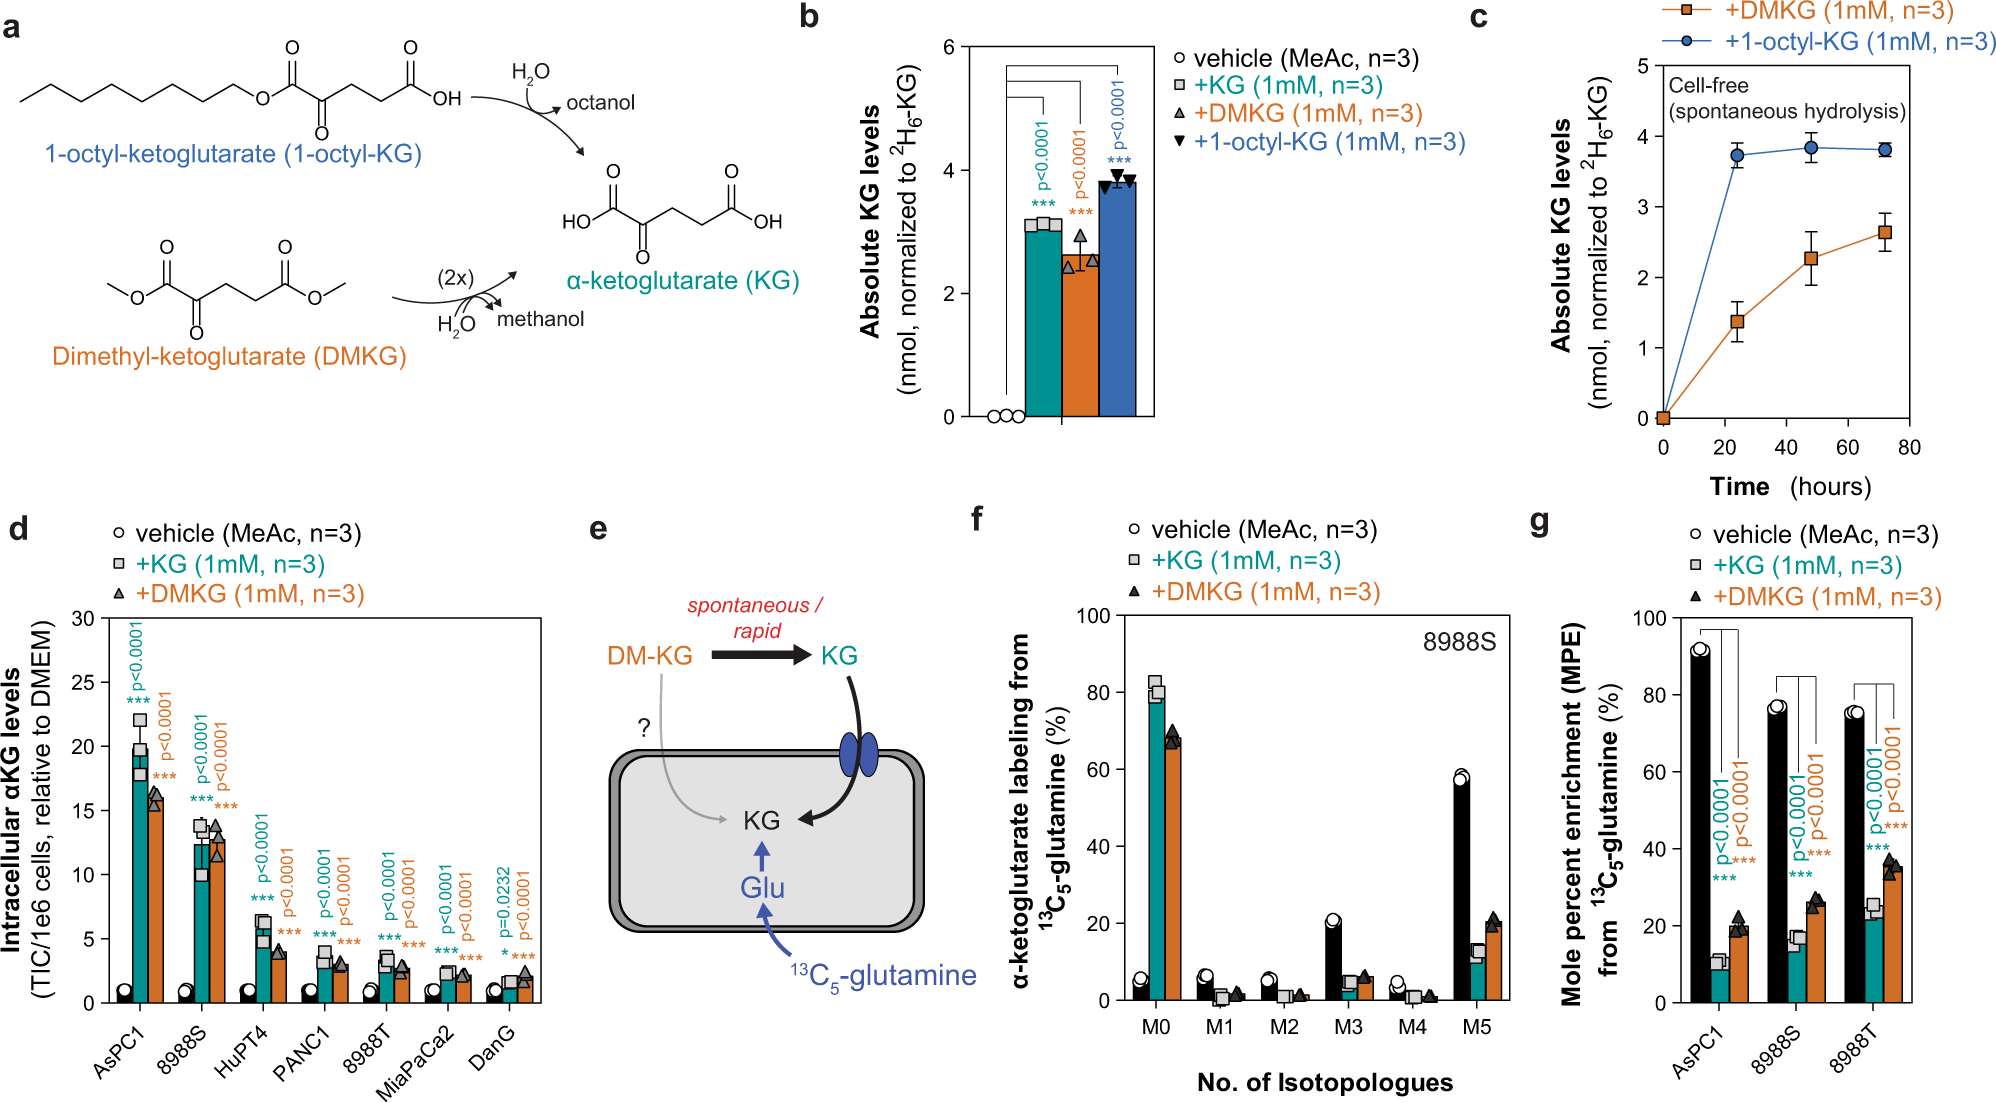 Spontaneous hydrolysis and spurious metabolic properties of α-ketoglutarate  esters | Nature Communications